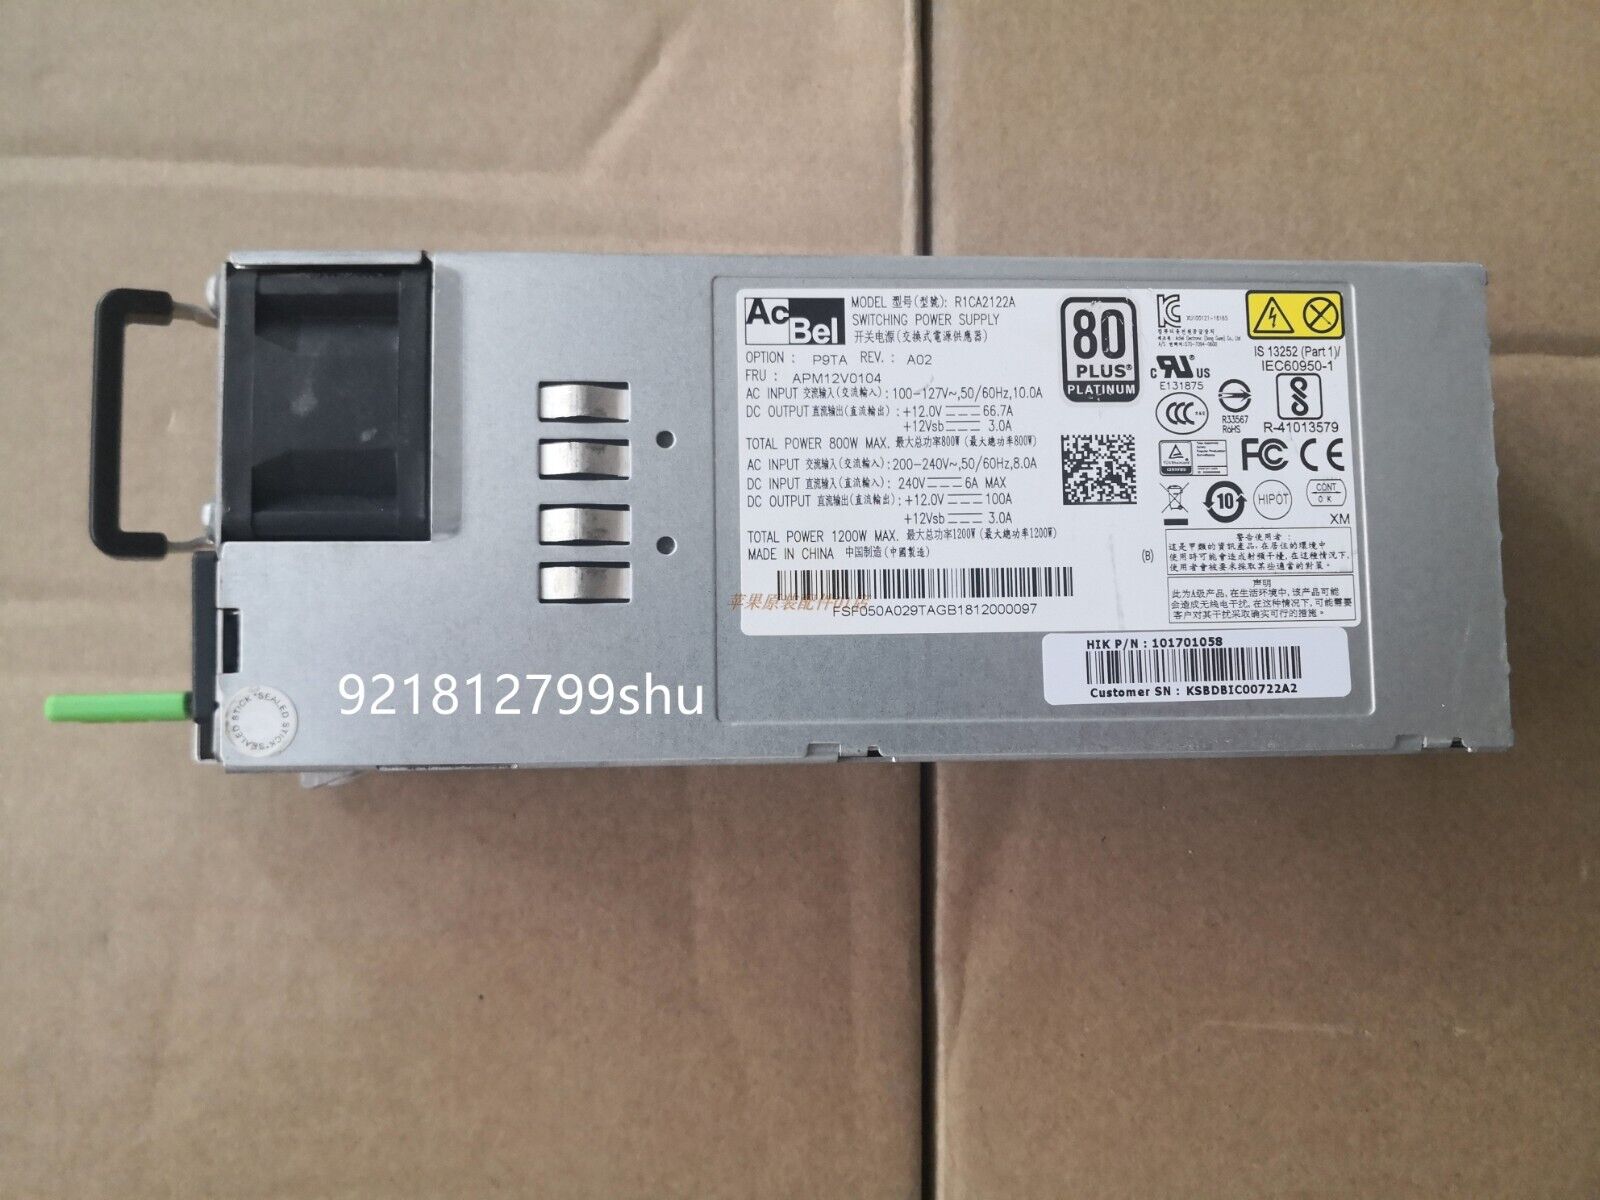 1pcs For Acbel R1CA2122A 1200W power supply